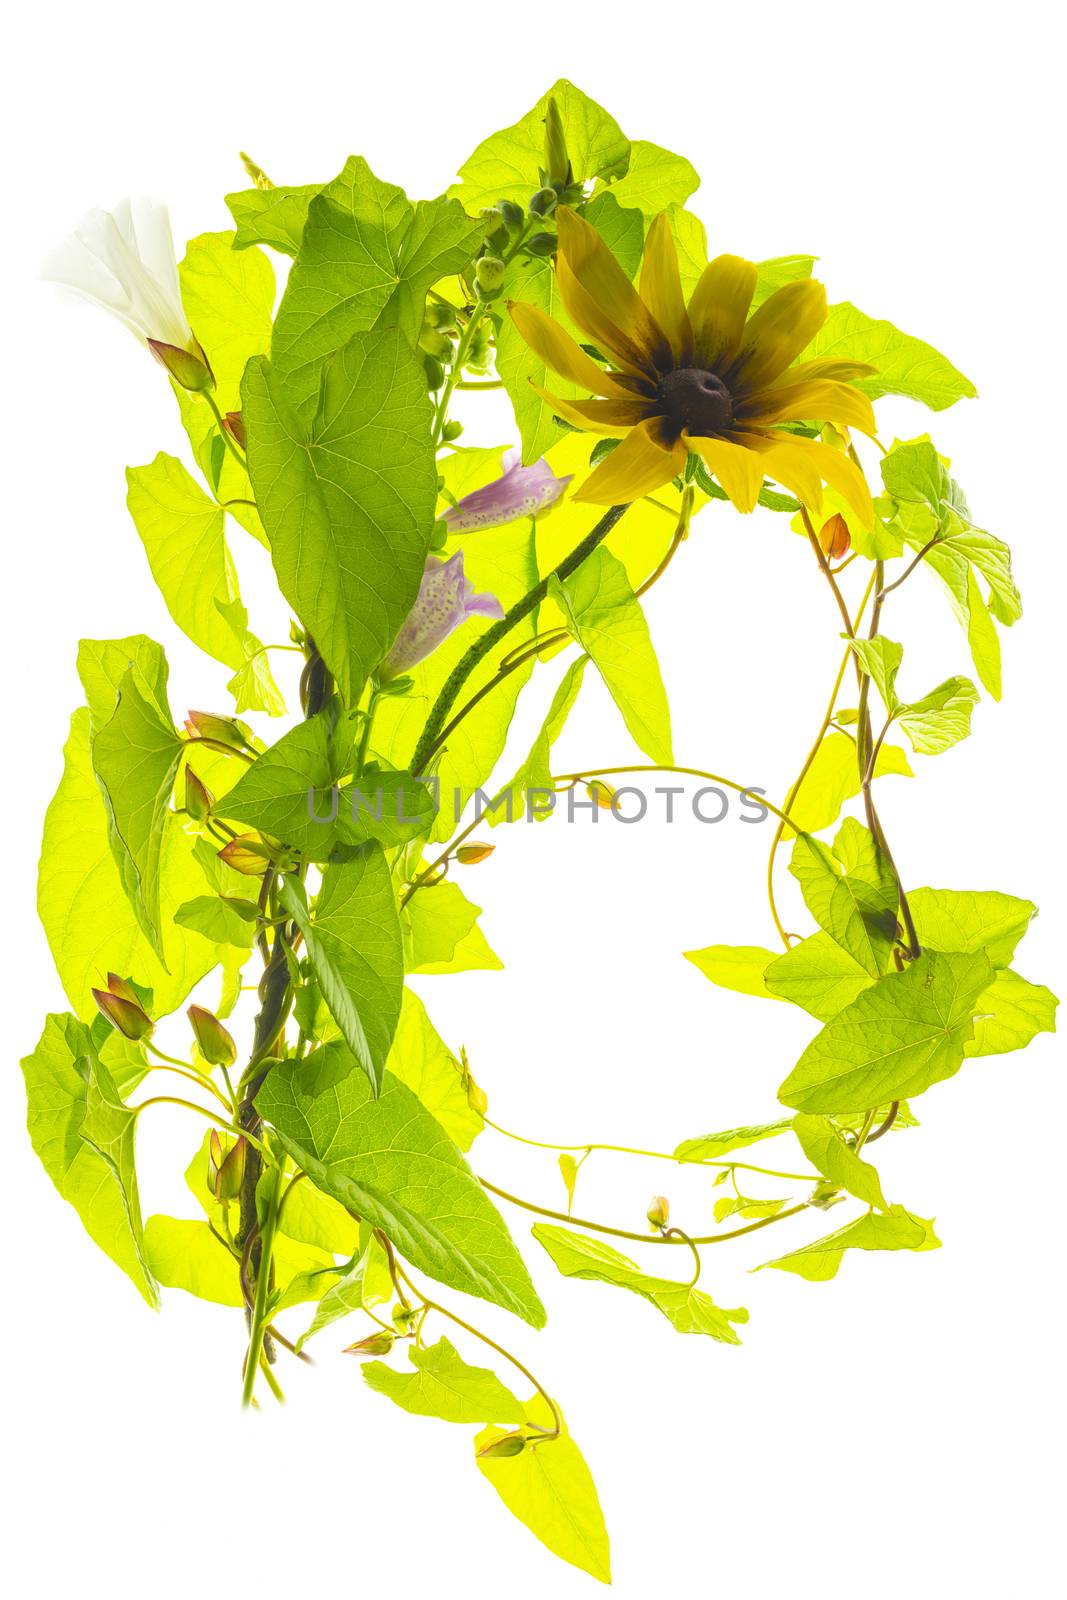 Bindweed flowers and yellow flowr isolated on a white background. by sashokddt